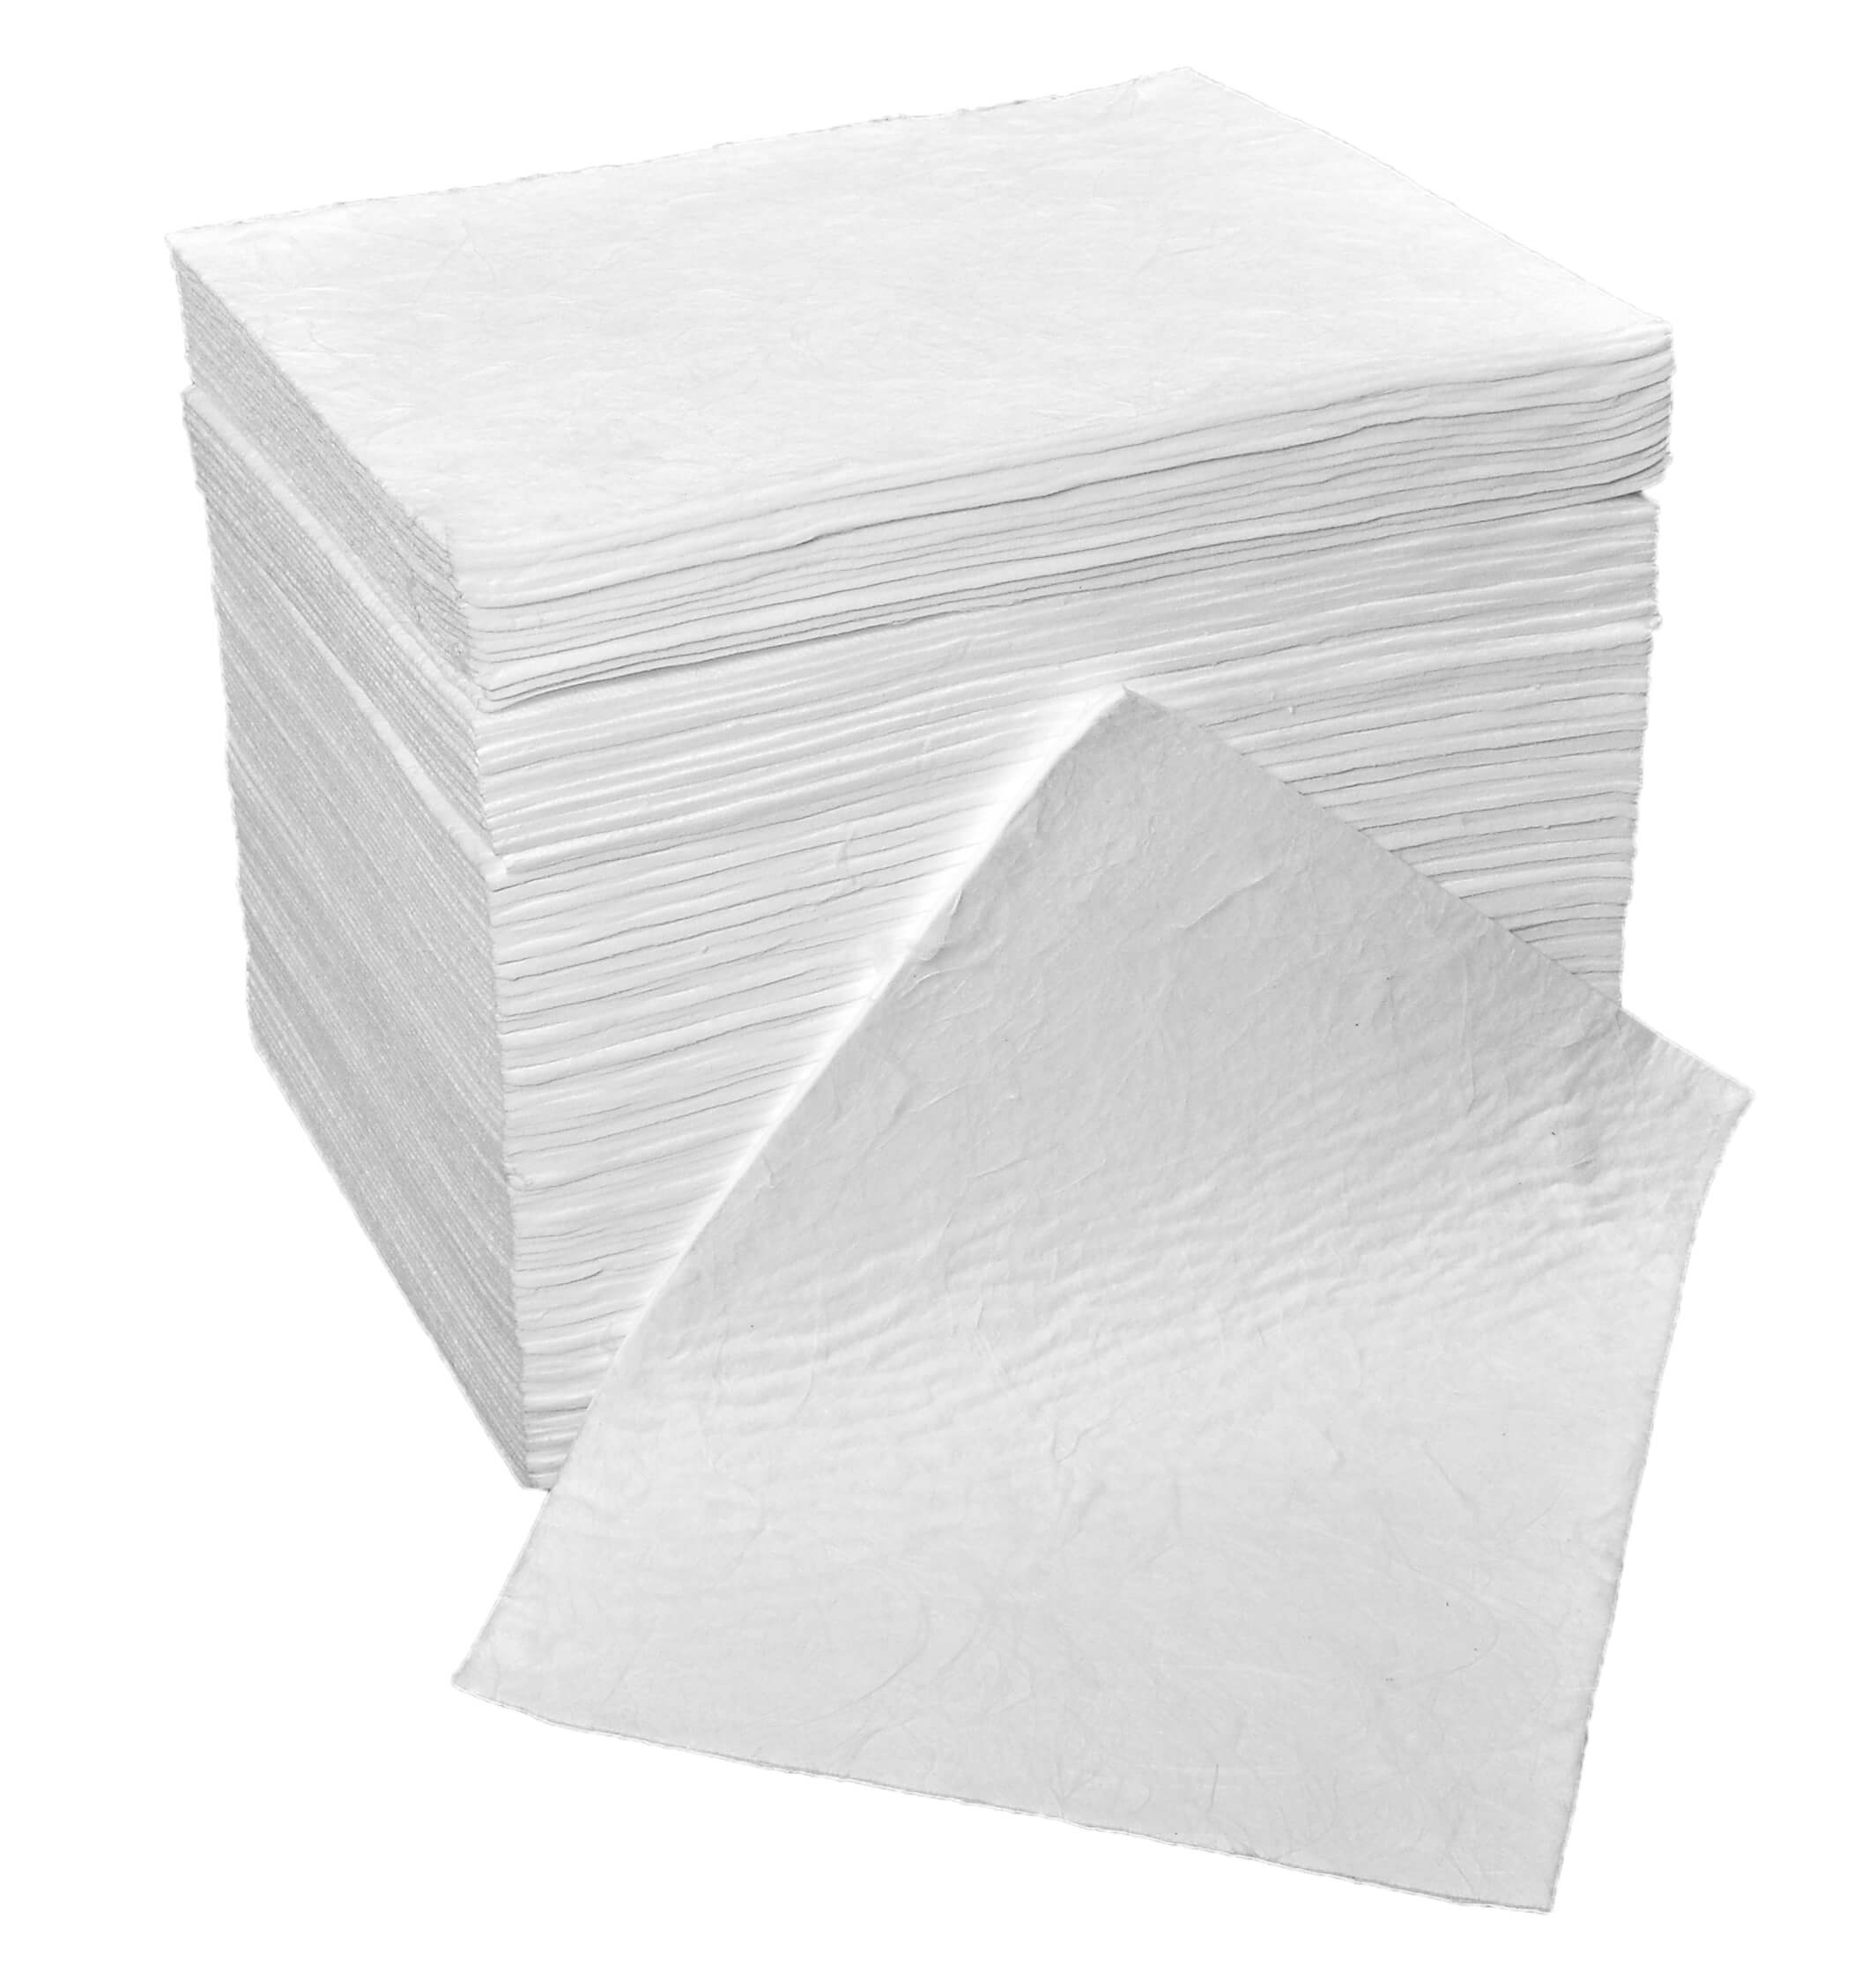 Double Weight Hydraulic Absorbent Pad - Box of 100 